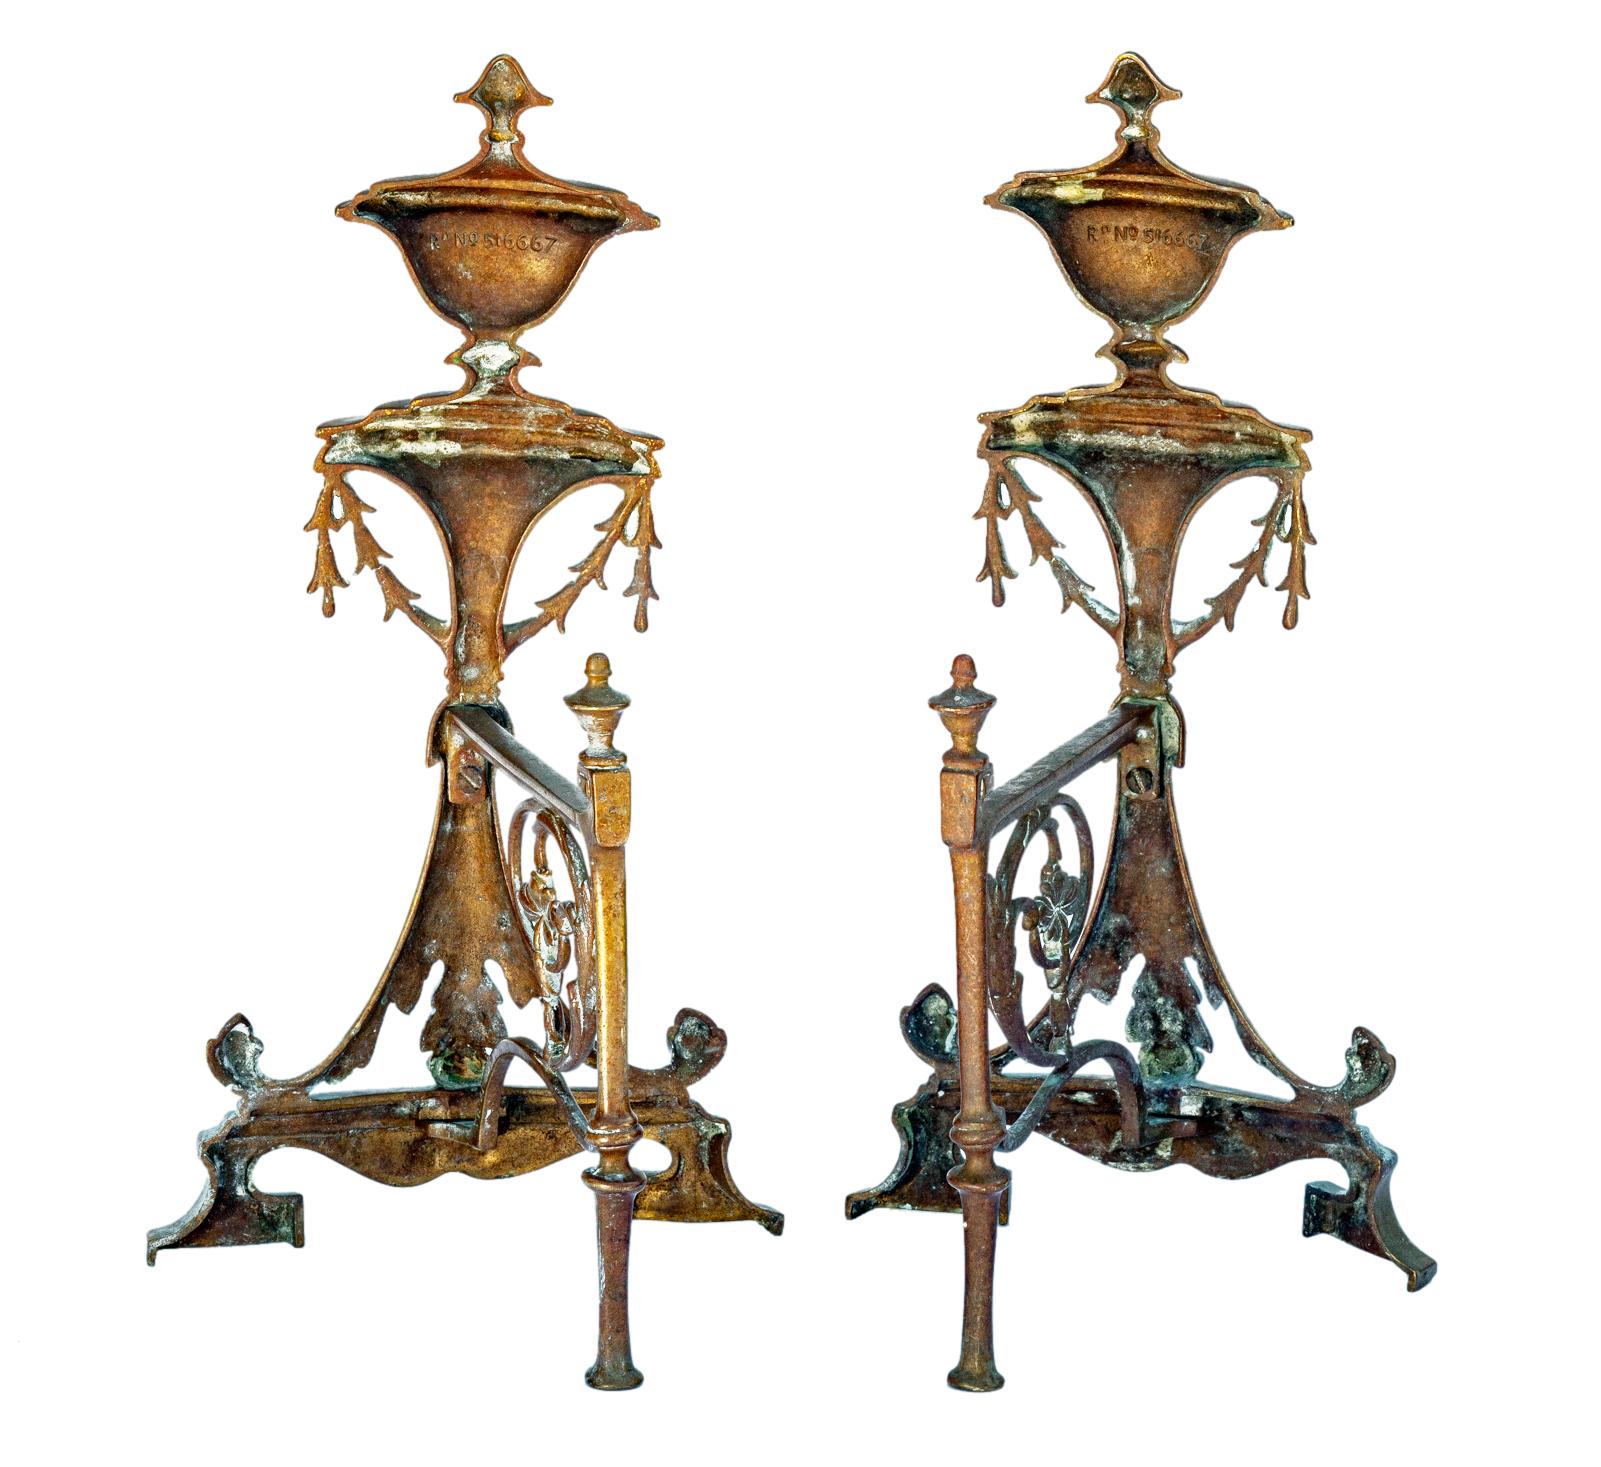 Antique French Bronze Decorative Fireplace Andirons In Good Condition For Sale In Malibu, CA